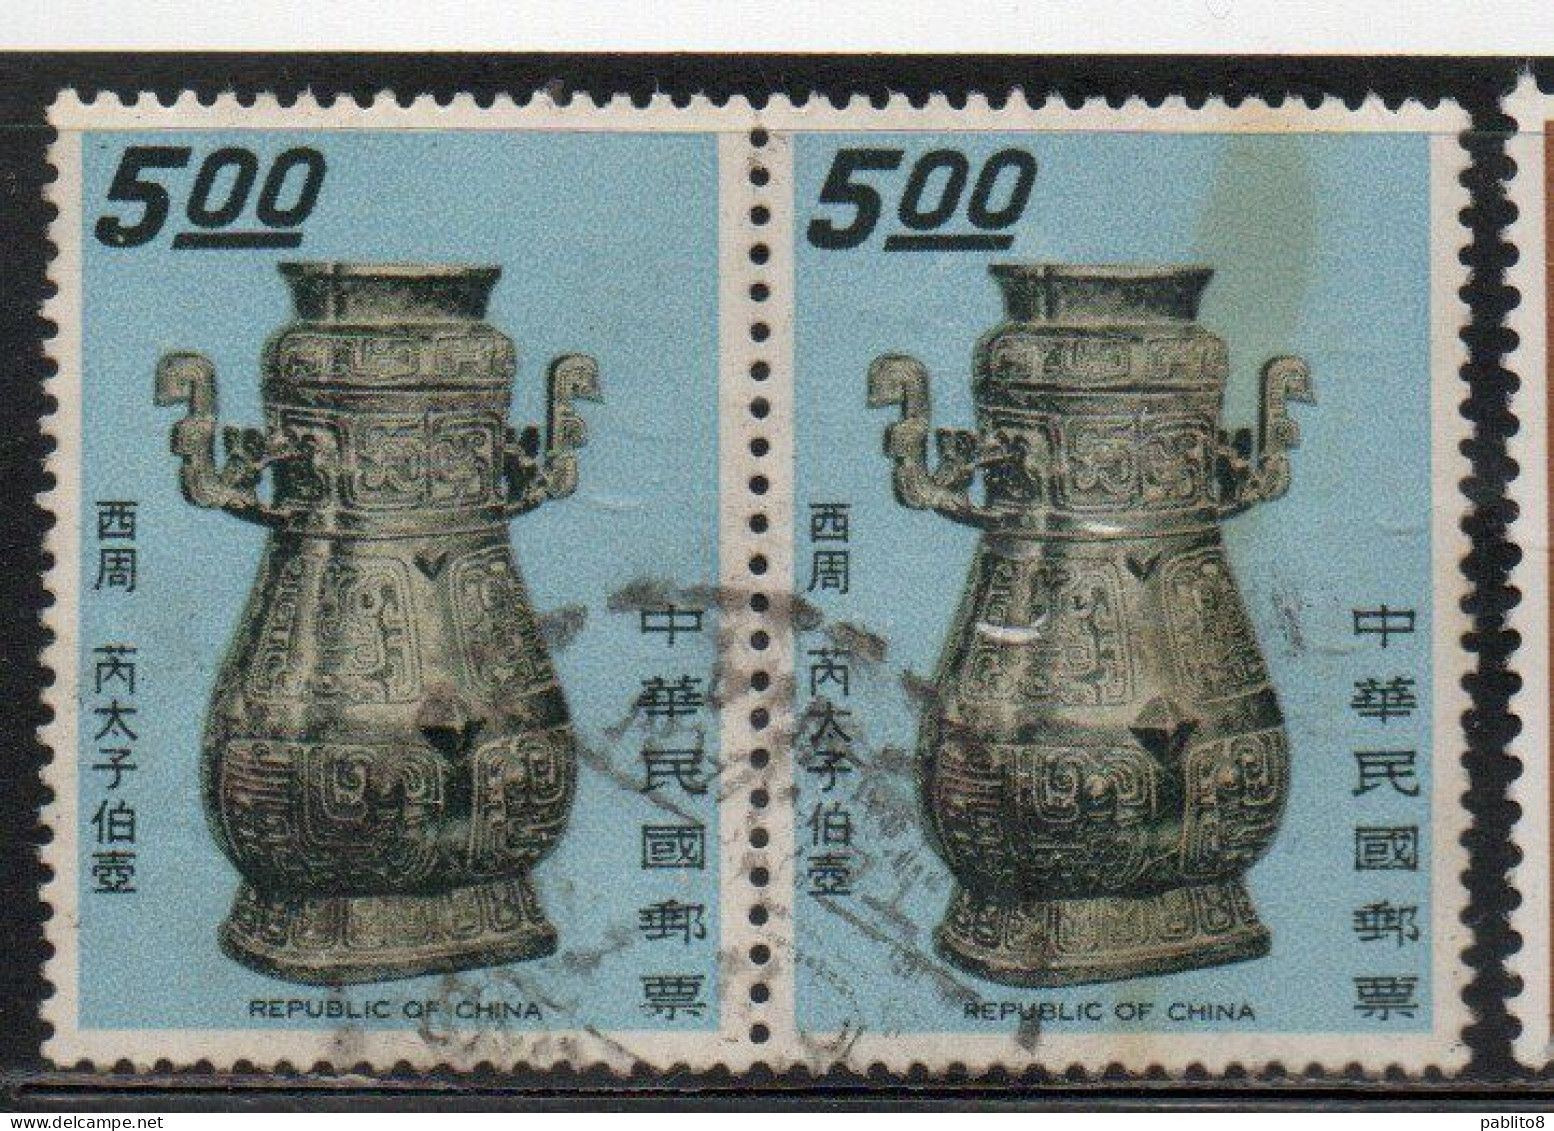 CHINA REPUBLIC CINA TAIWAN FORMOSA 1970 ANCIENT ART TREASURES JU PORCELAIN VASE WITH 3 BULLS 5$ USED USATO OBLIT - Used Stamps